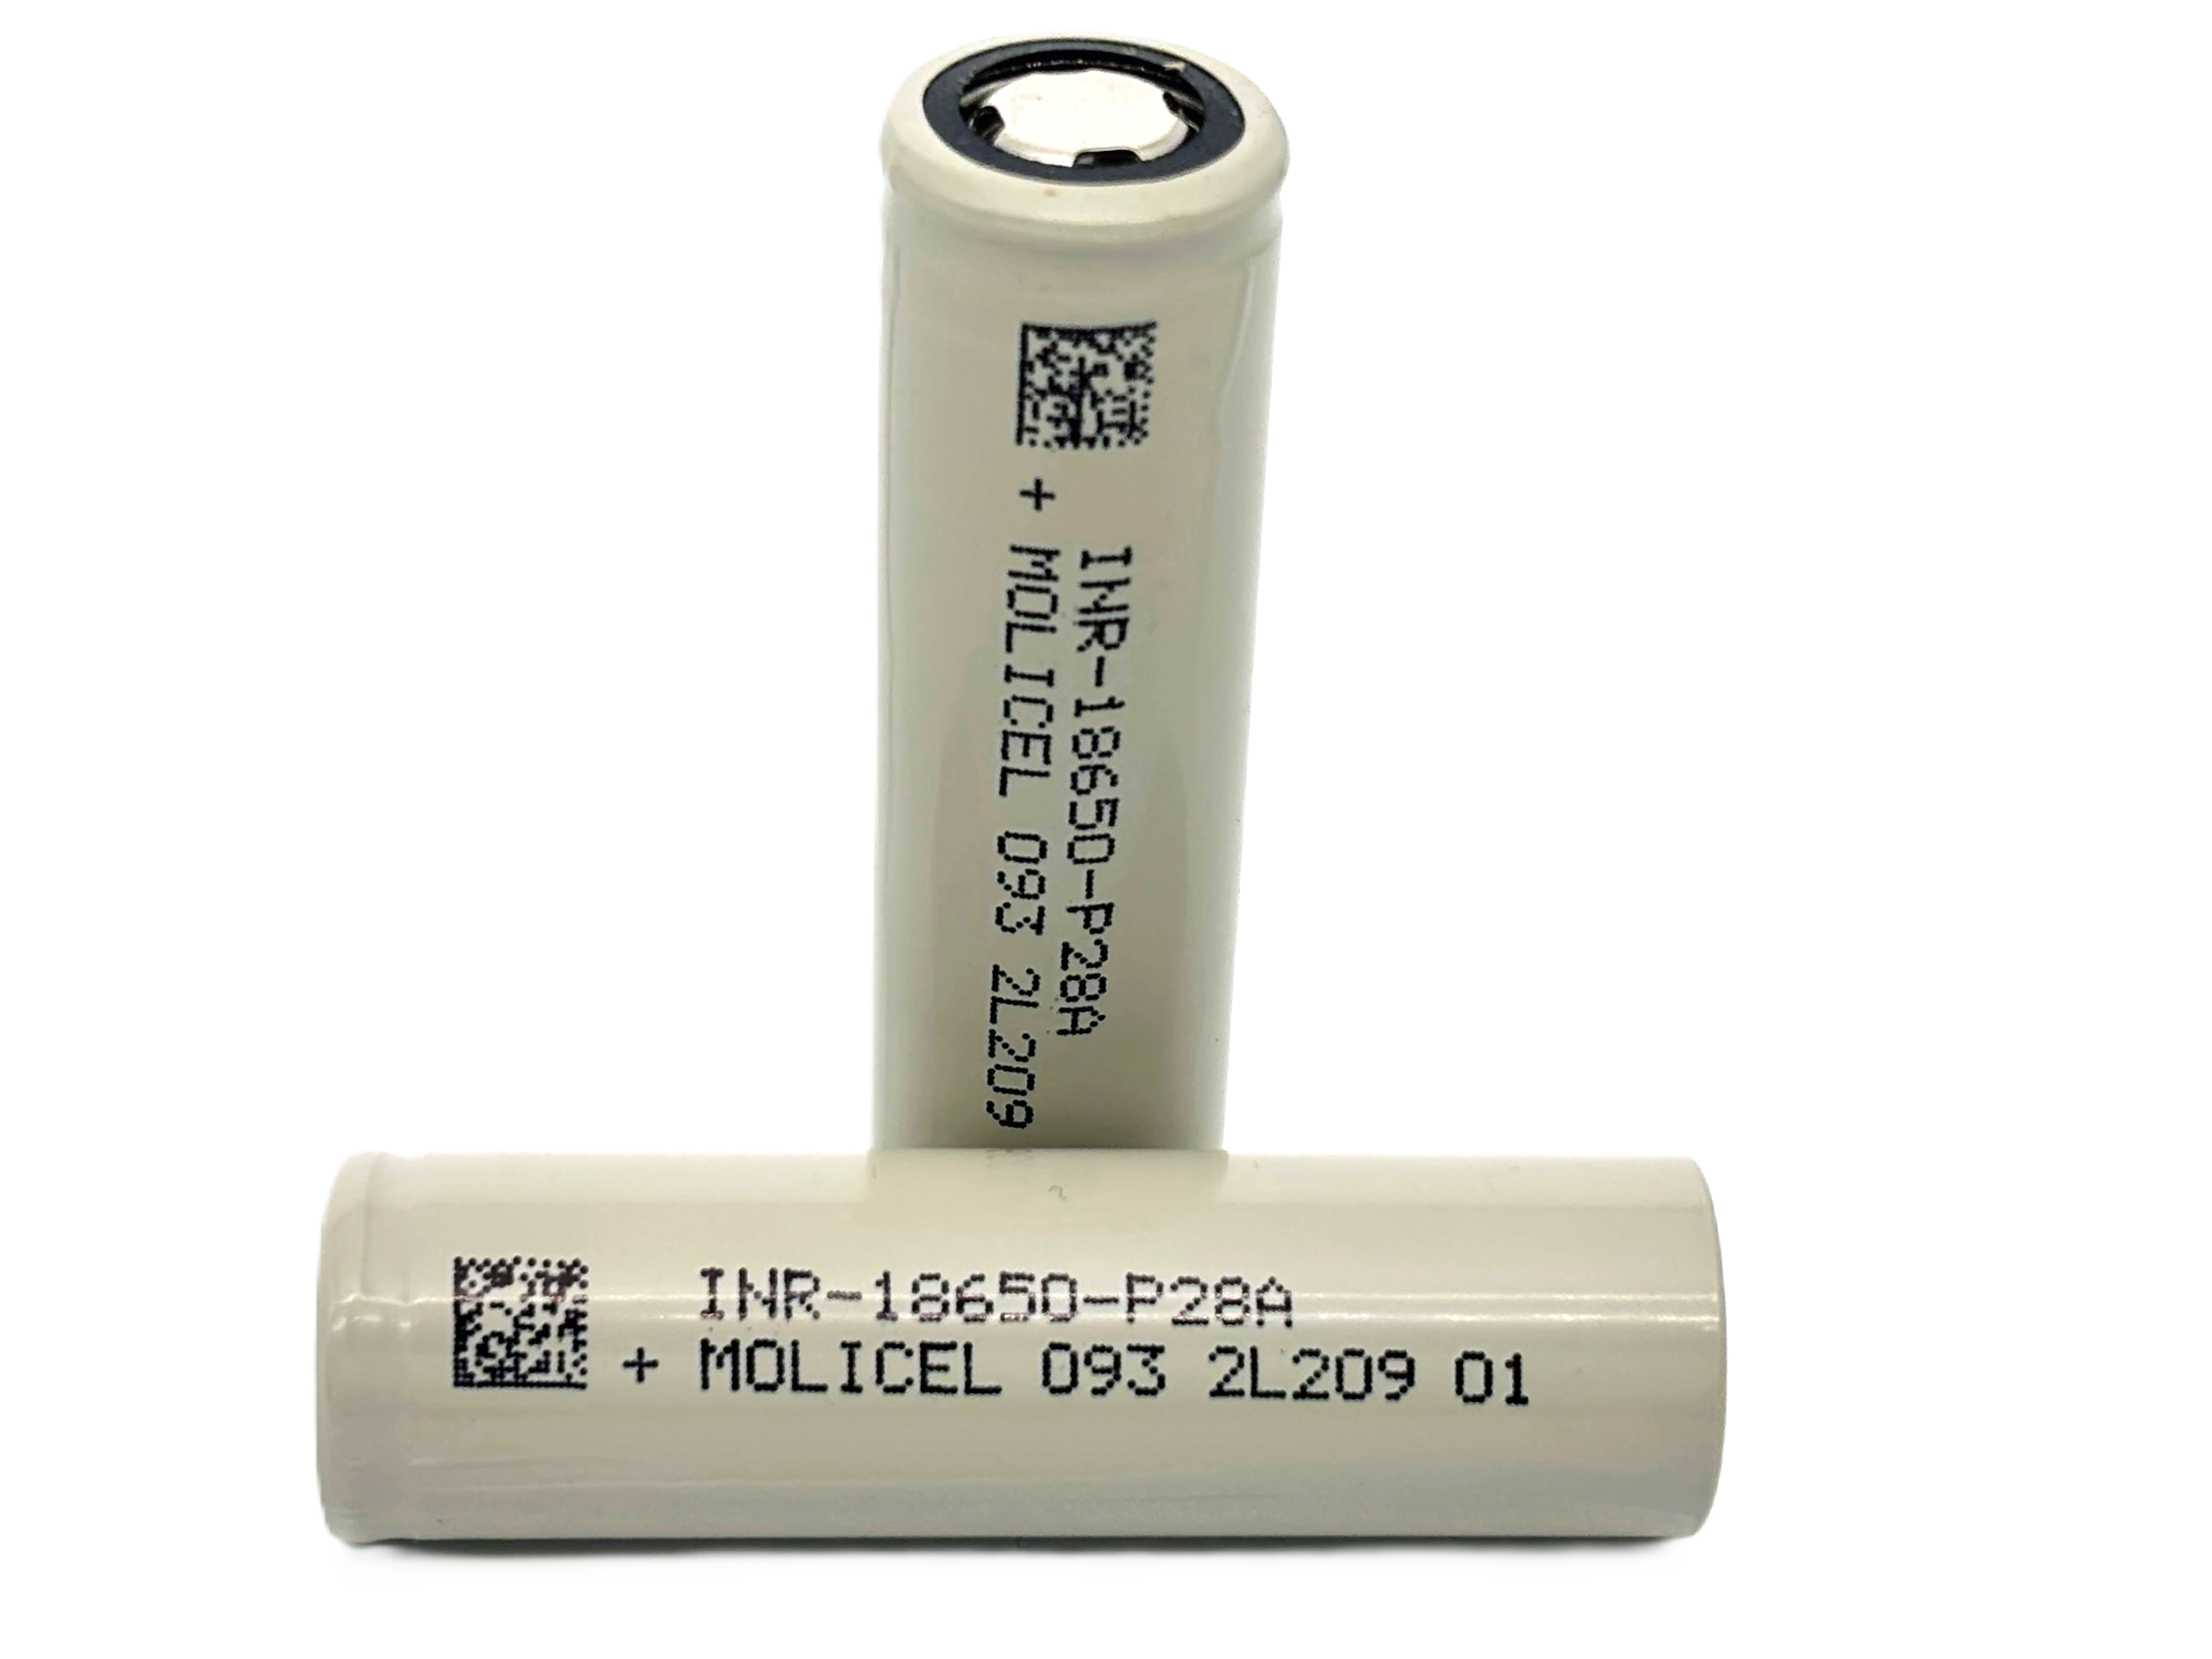 Lithium Ion Batteries - 18650 Cylindrical Cells